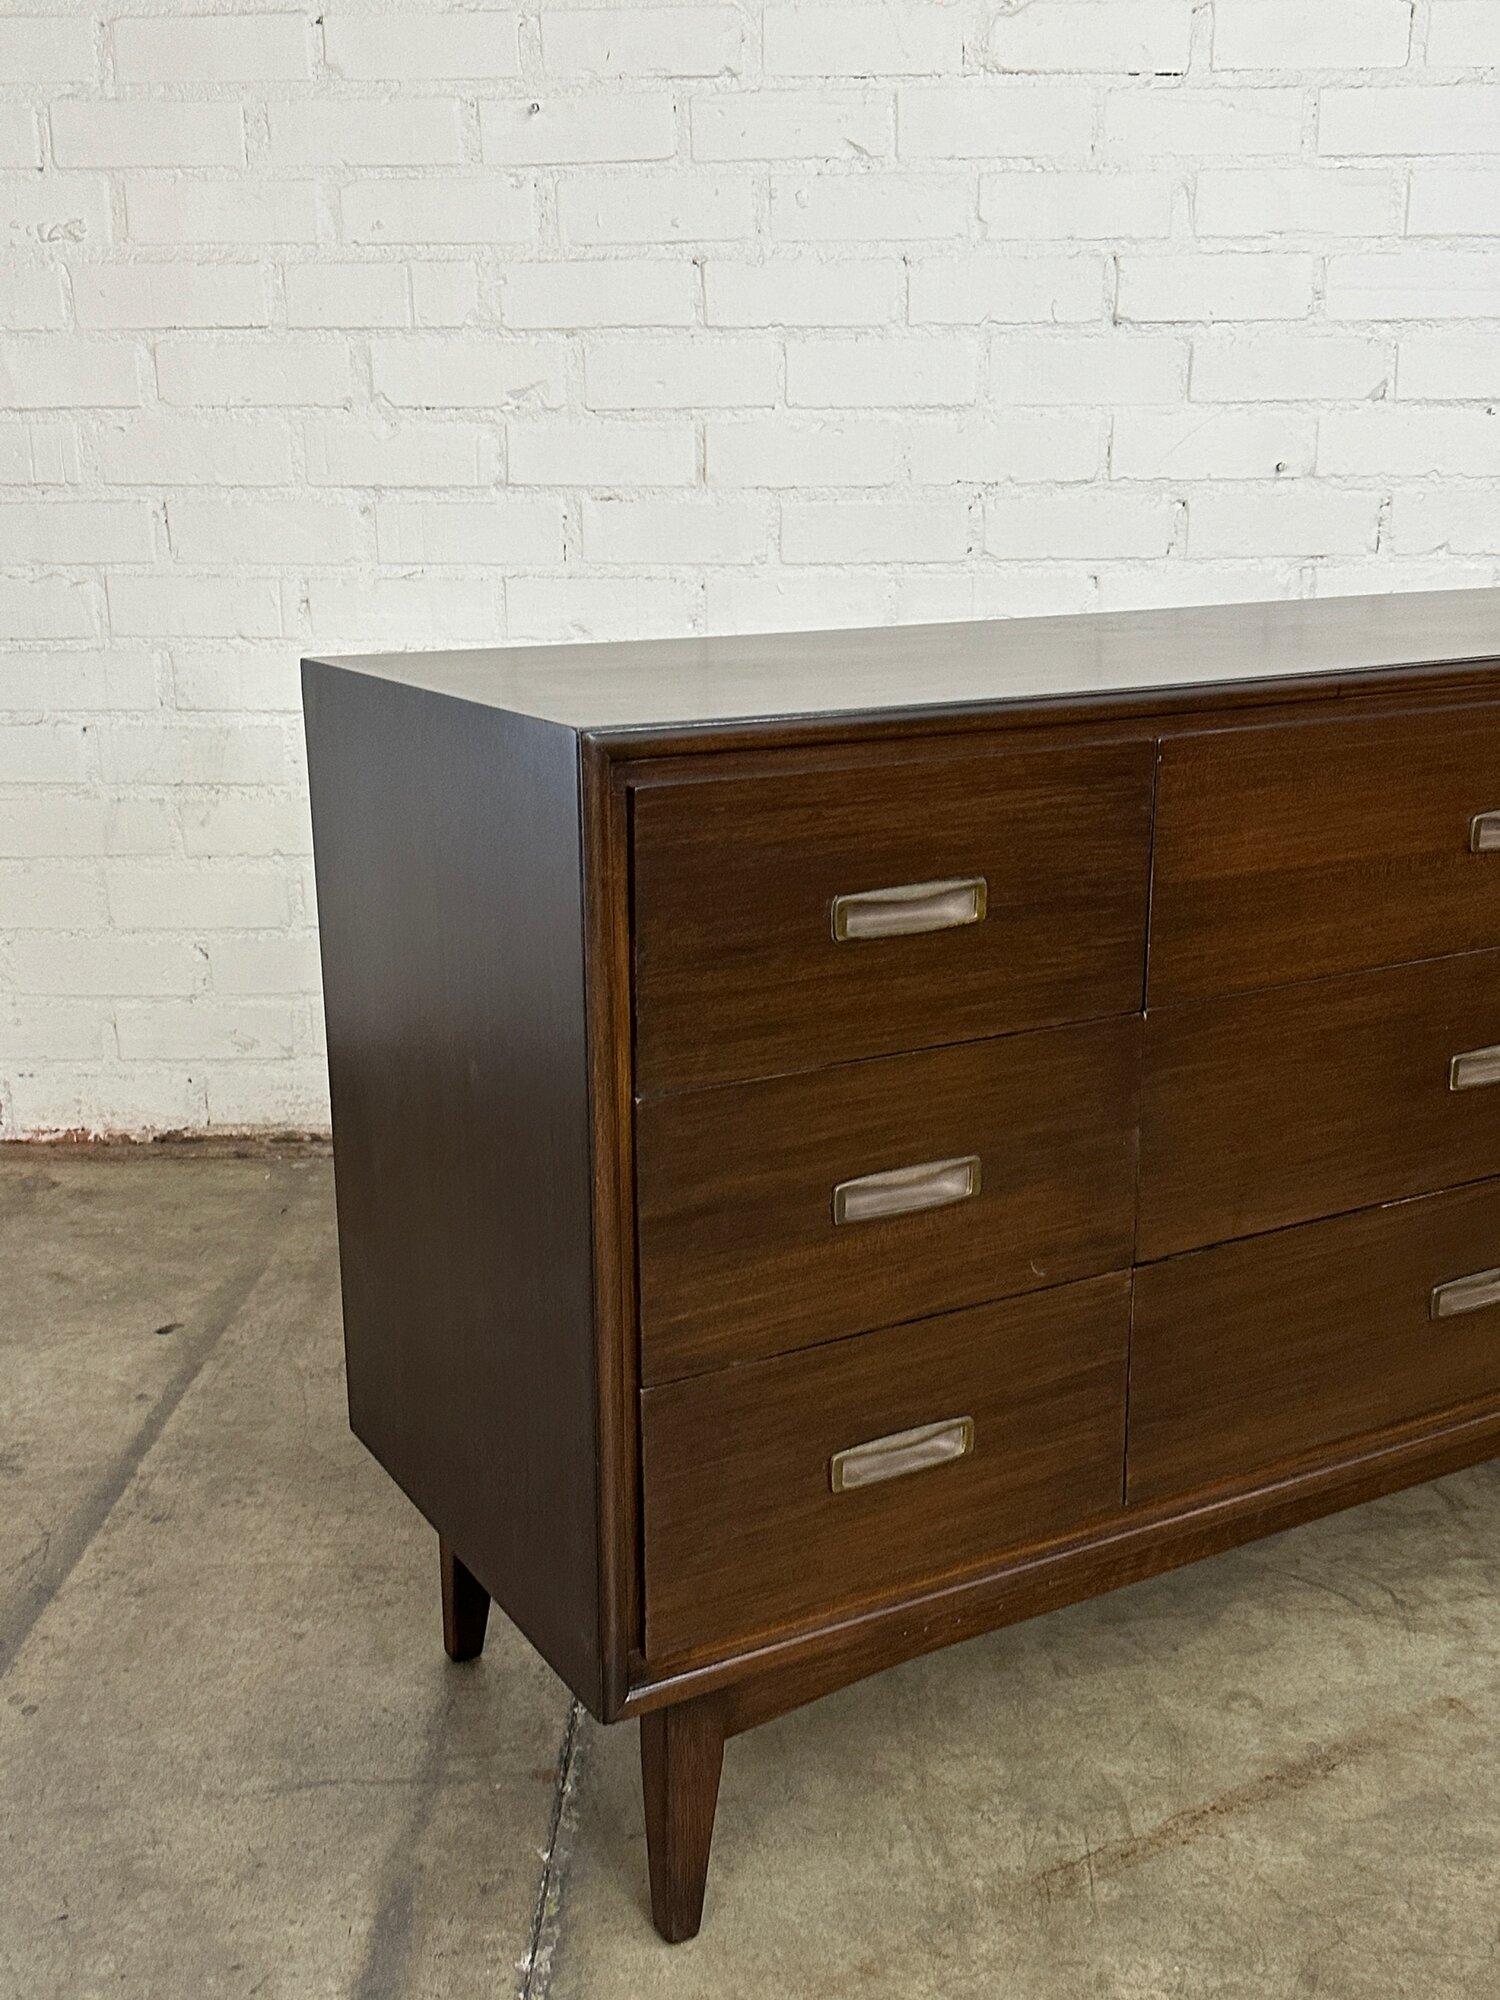 W62 D19 H33

Fully restored dark walnut mid century dresser. Item features original recessed hardware, a rich dark stain, and slightly tapered legs. Item is structurally sound and strudy with no areas of major wear.

